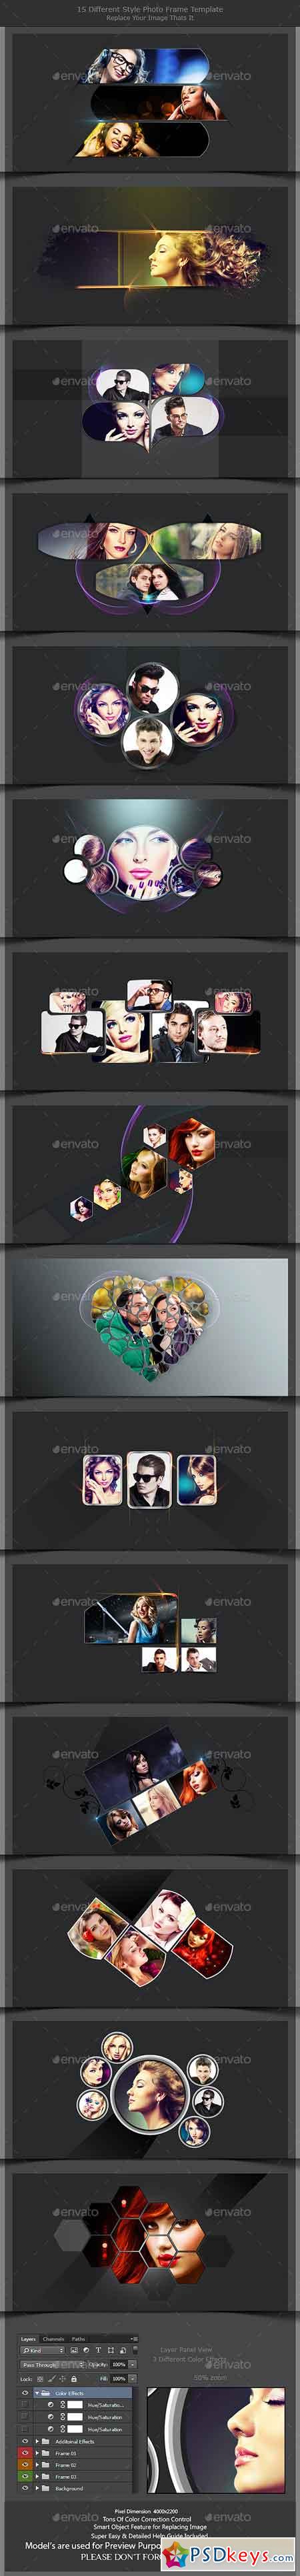 15 Different Styles Photo Frame Template 10925154